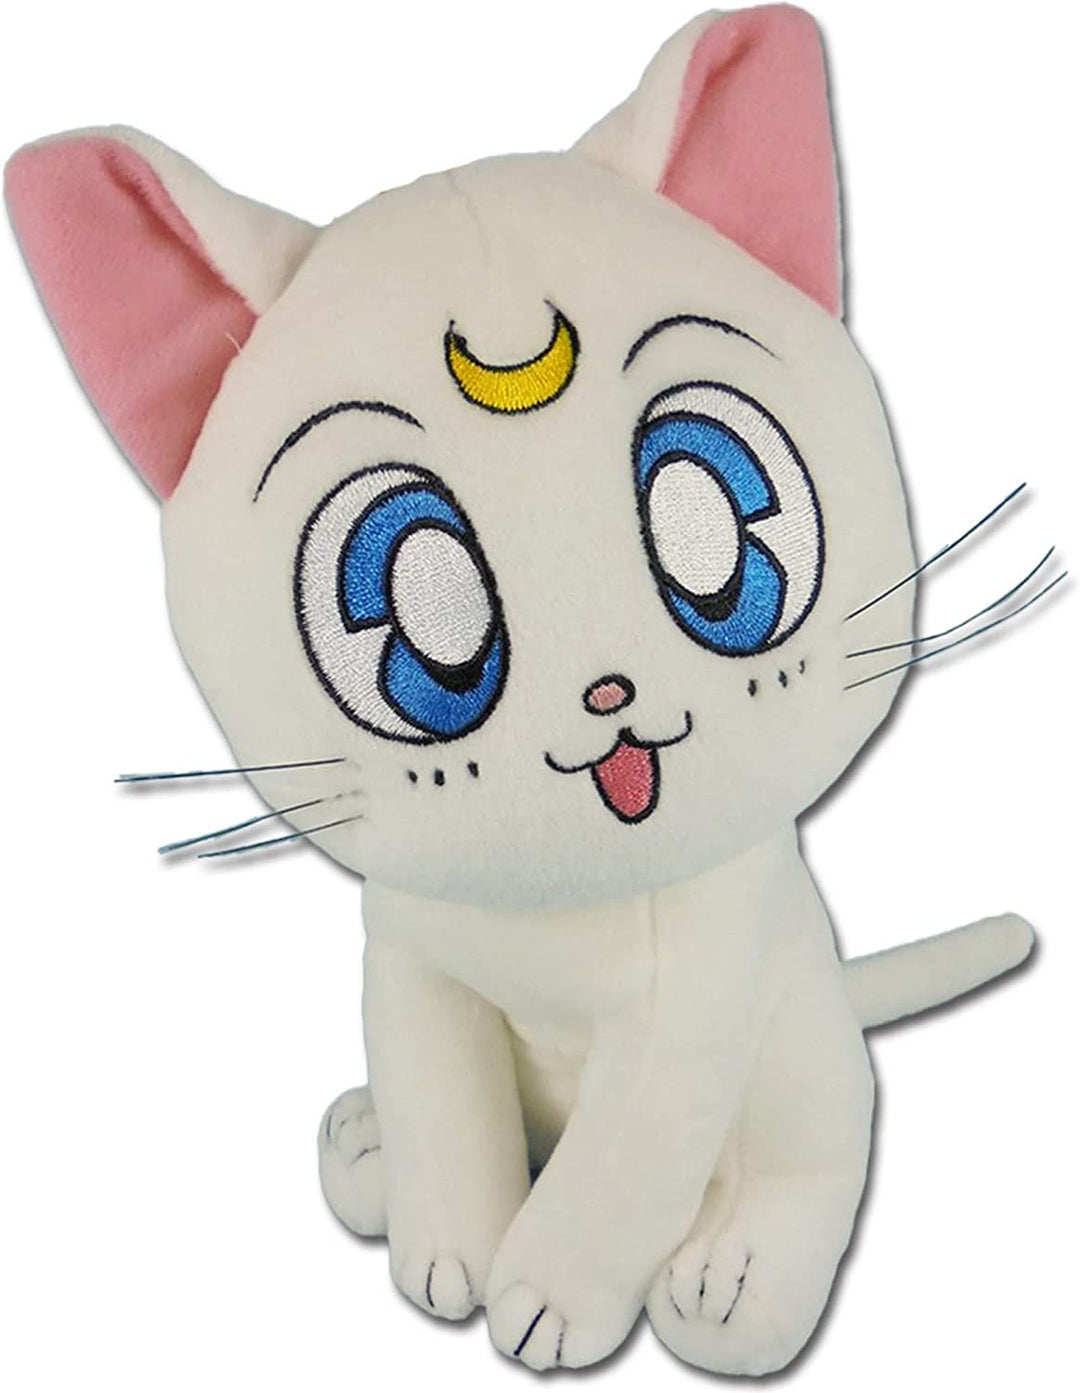 Sailor Moon - Artemis Sitting Plush Stuffed Toy Collectible Great Eastern Entertainment